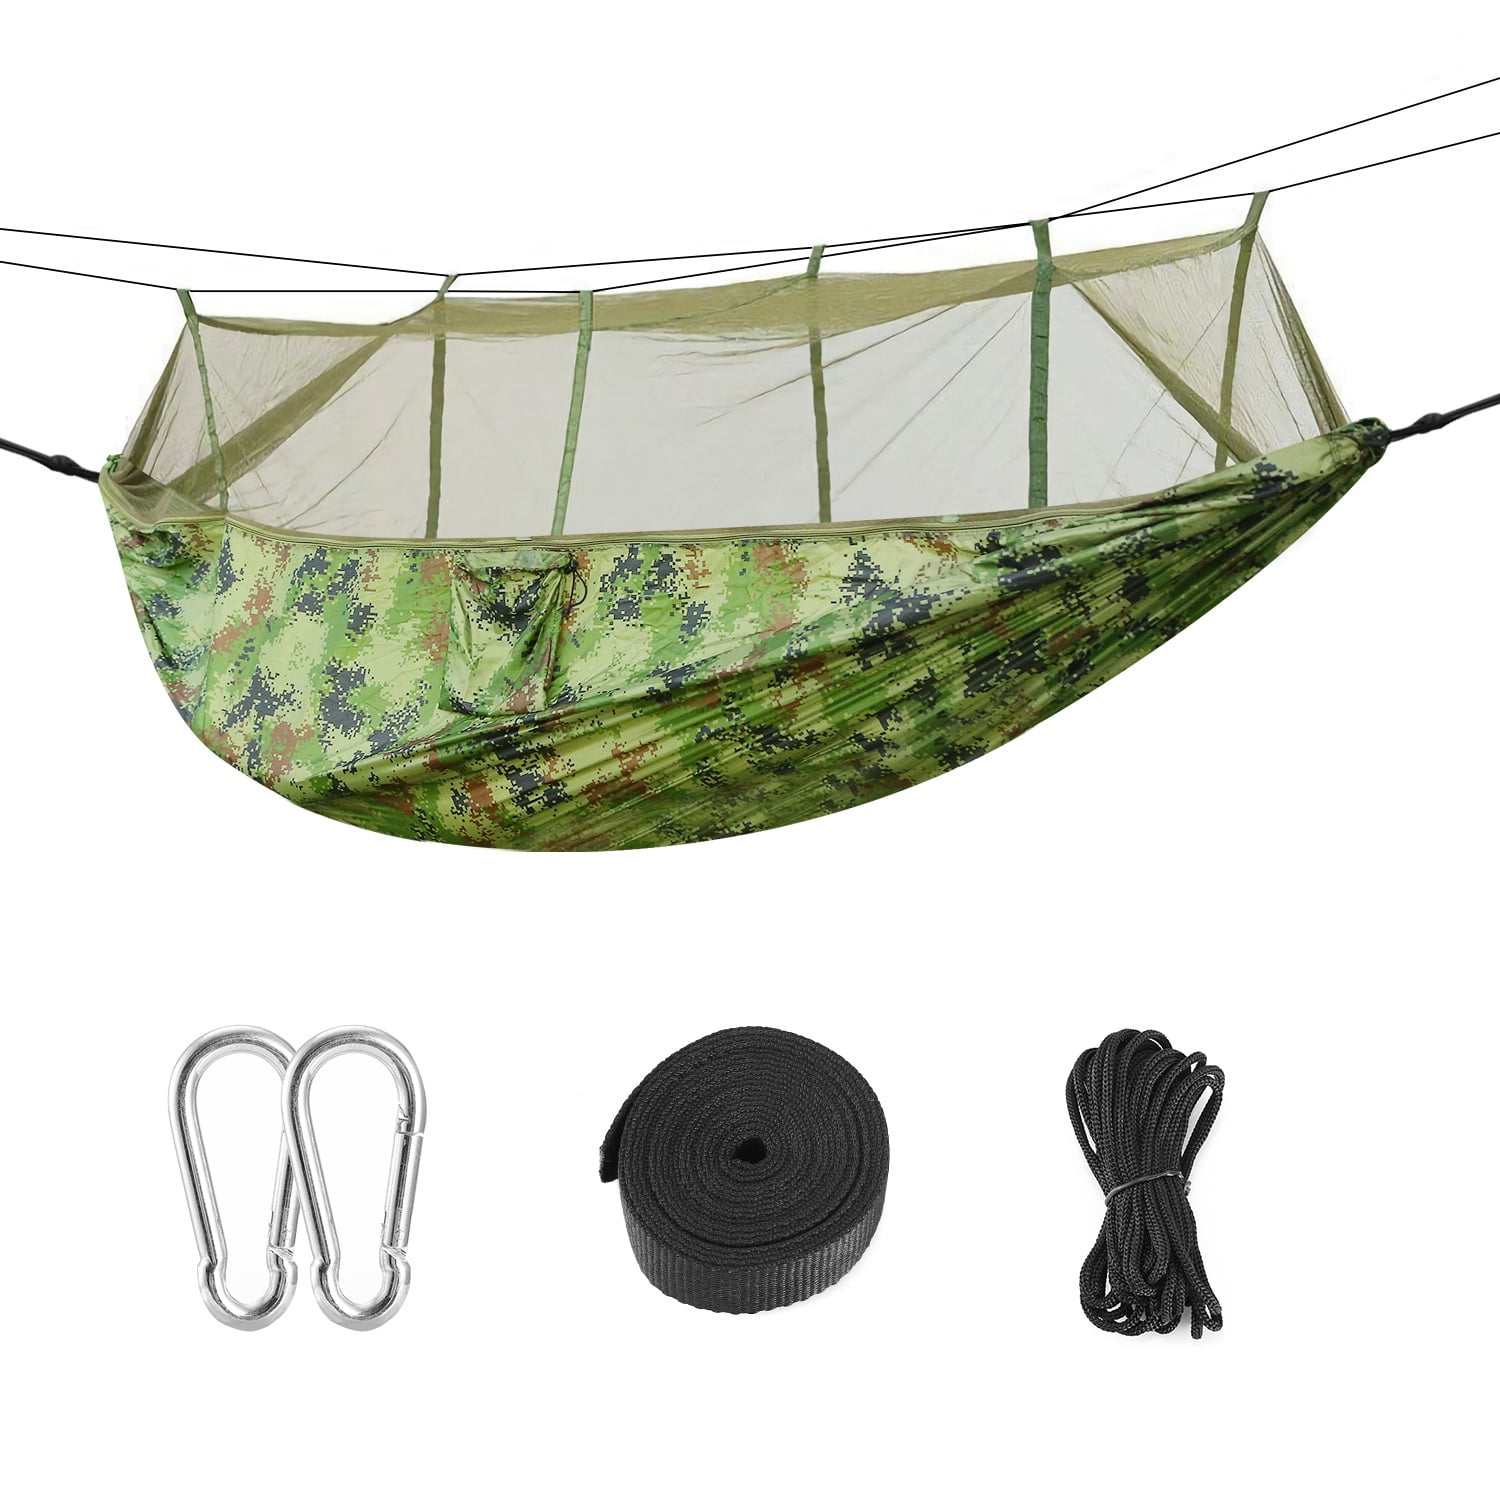 New Double Outdoor Person Travel Camping Hanging Hammock Bed Wi Mosquito Net Set 